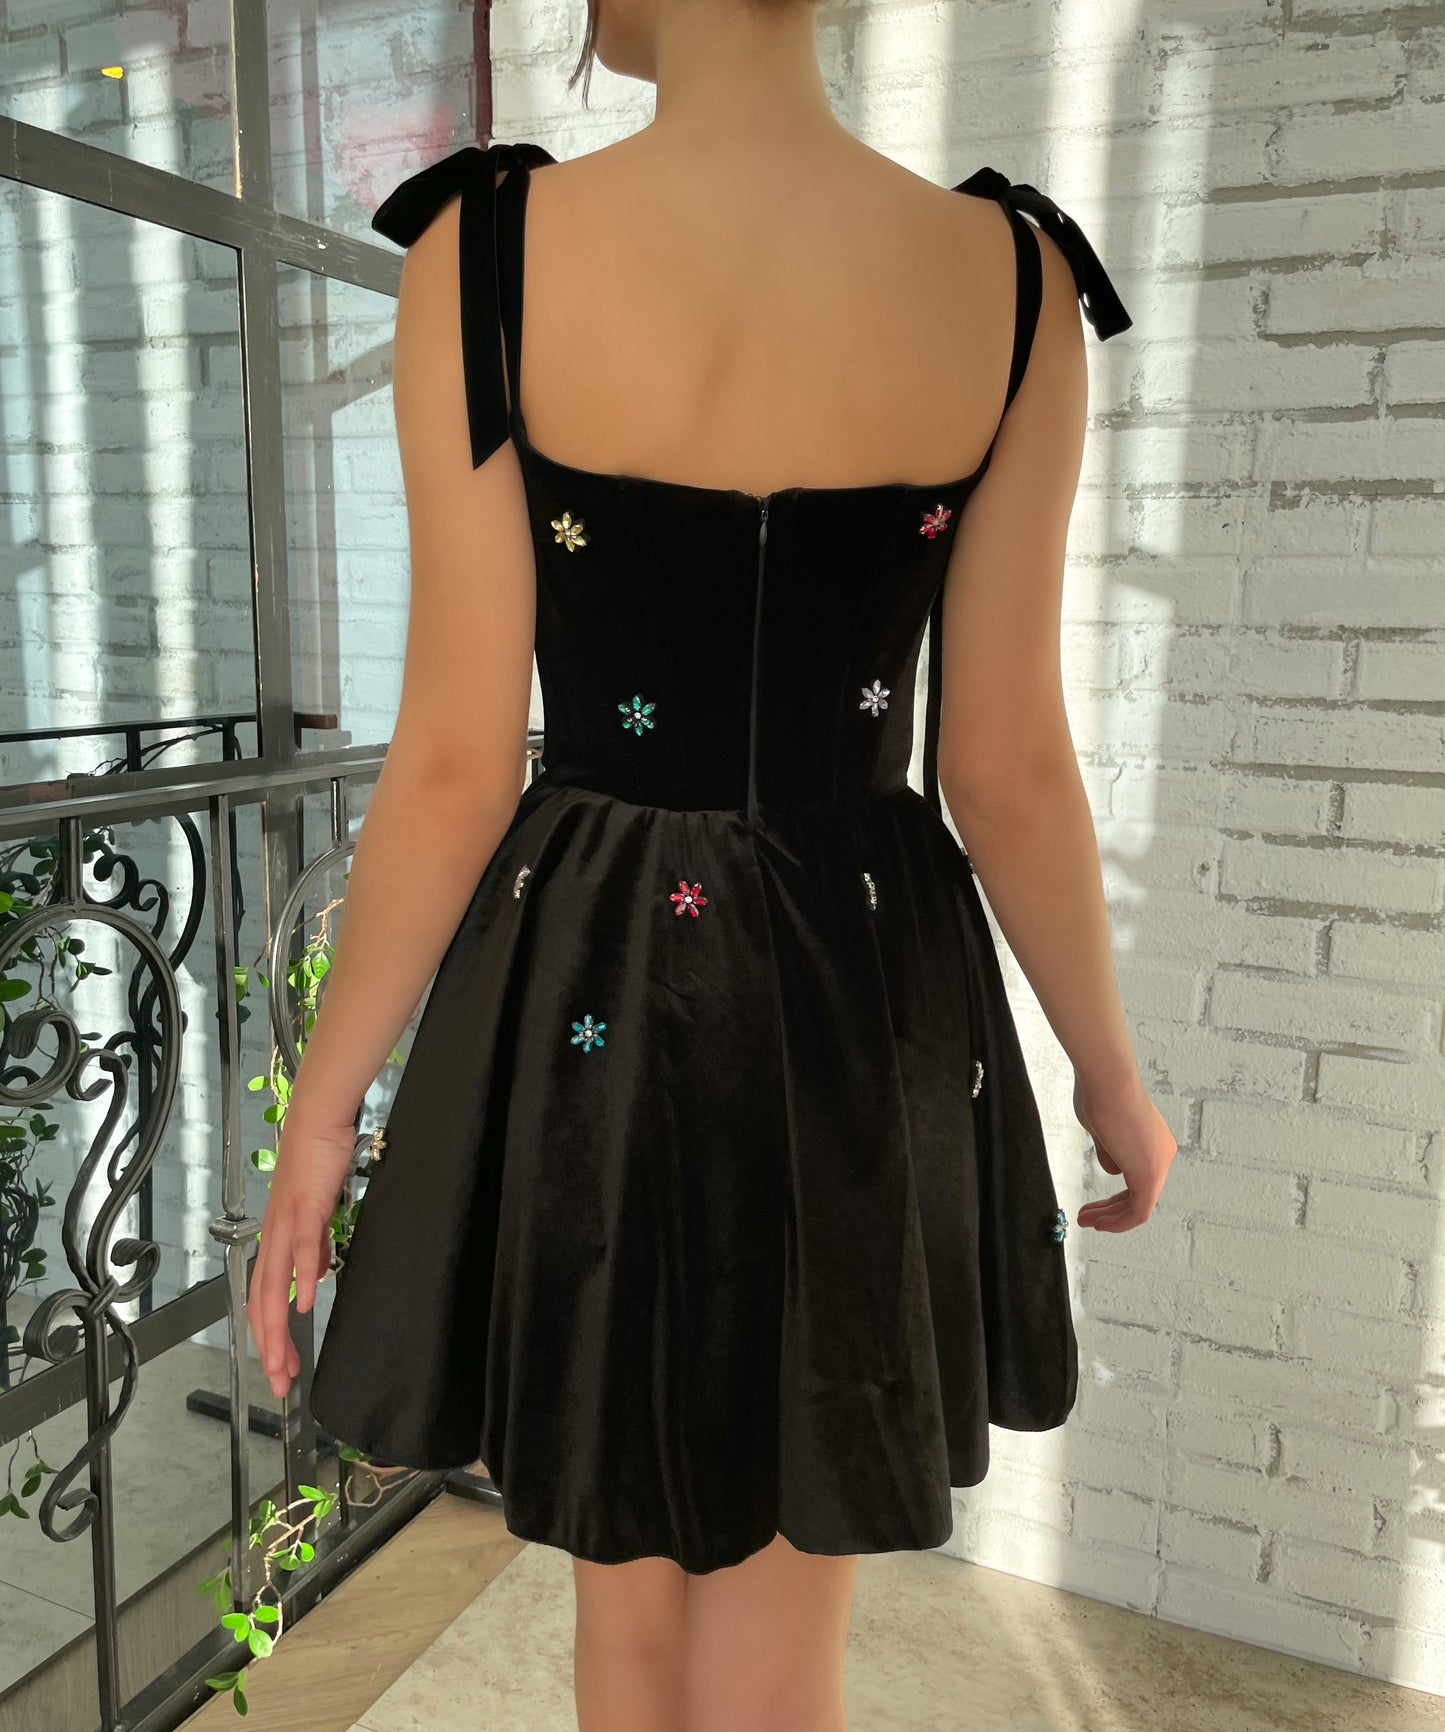 Black mini dress with bow straps and embroidery